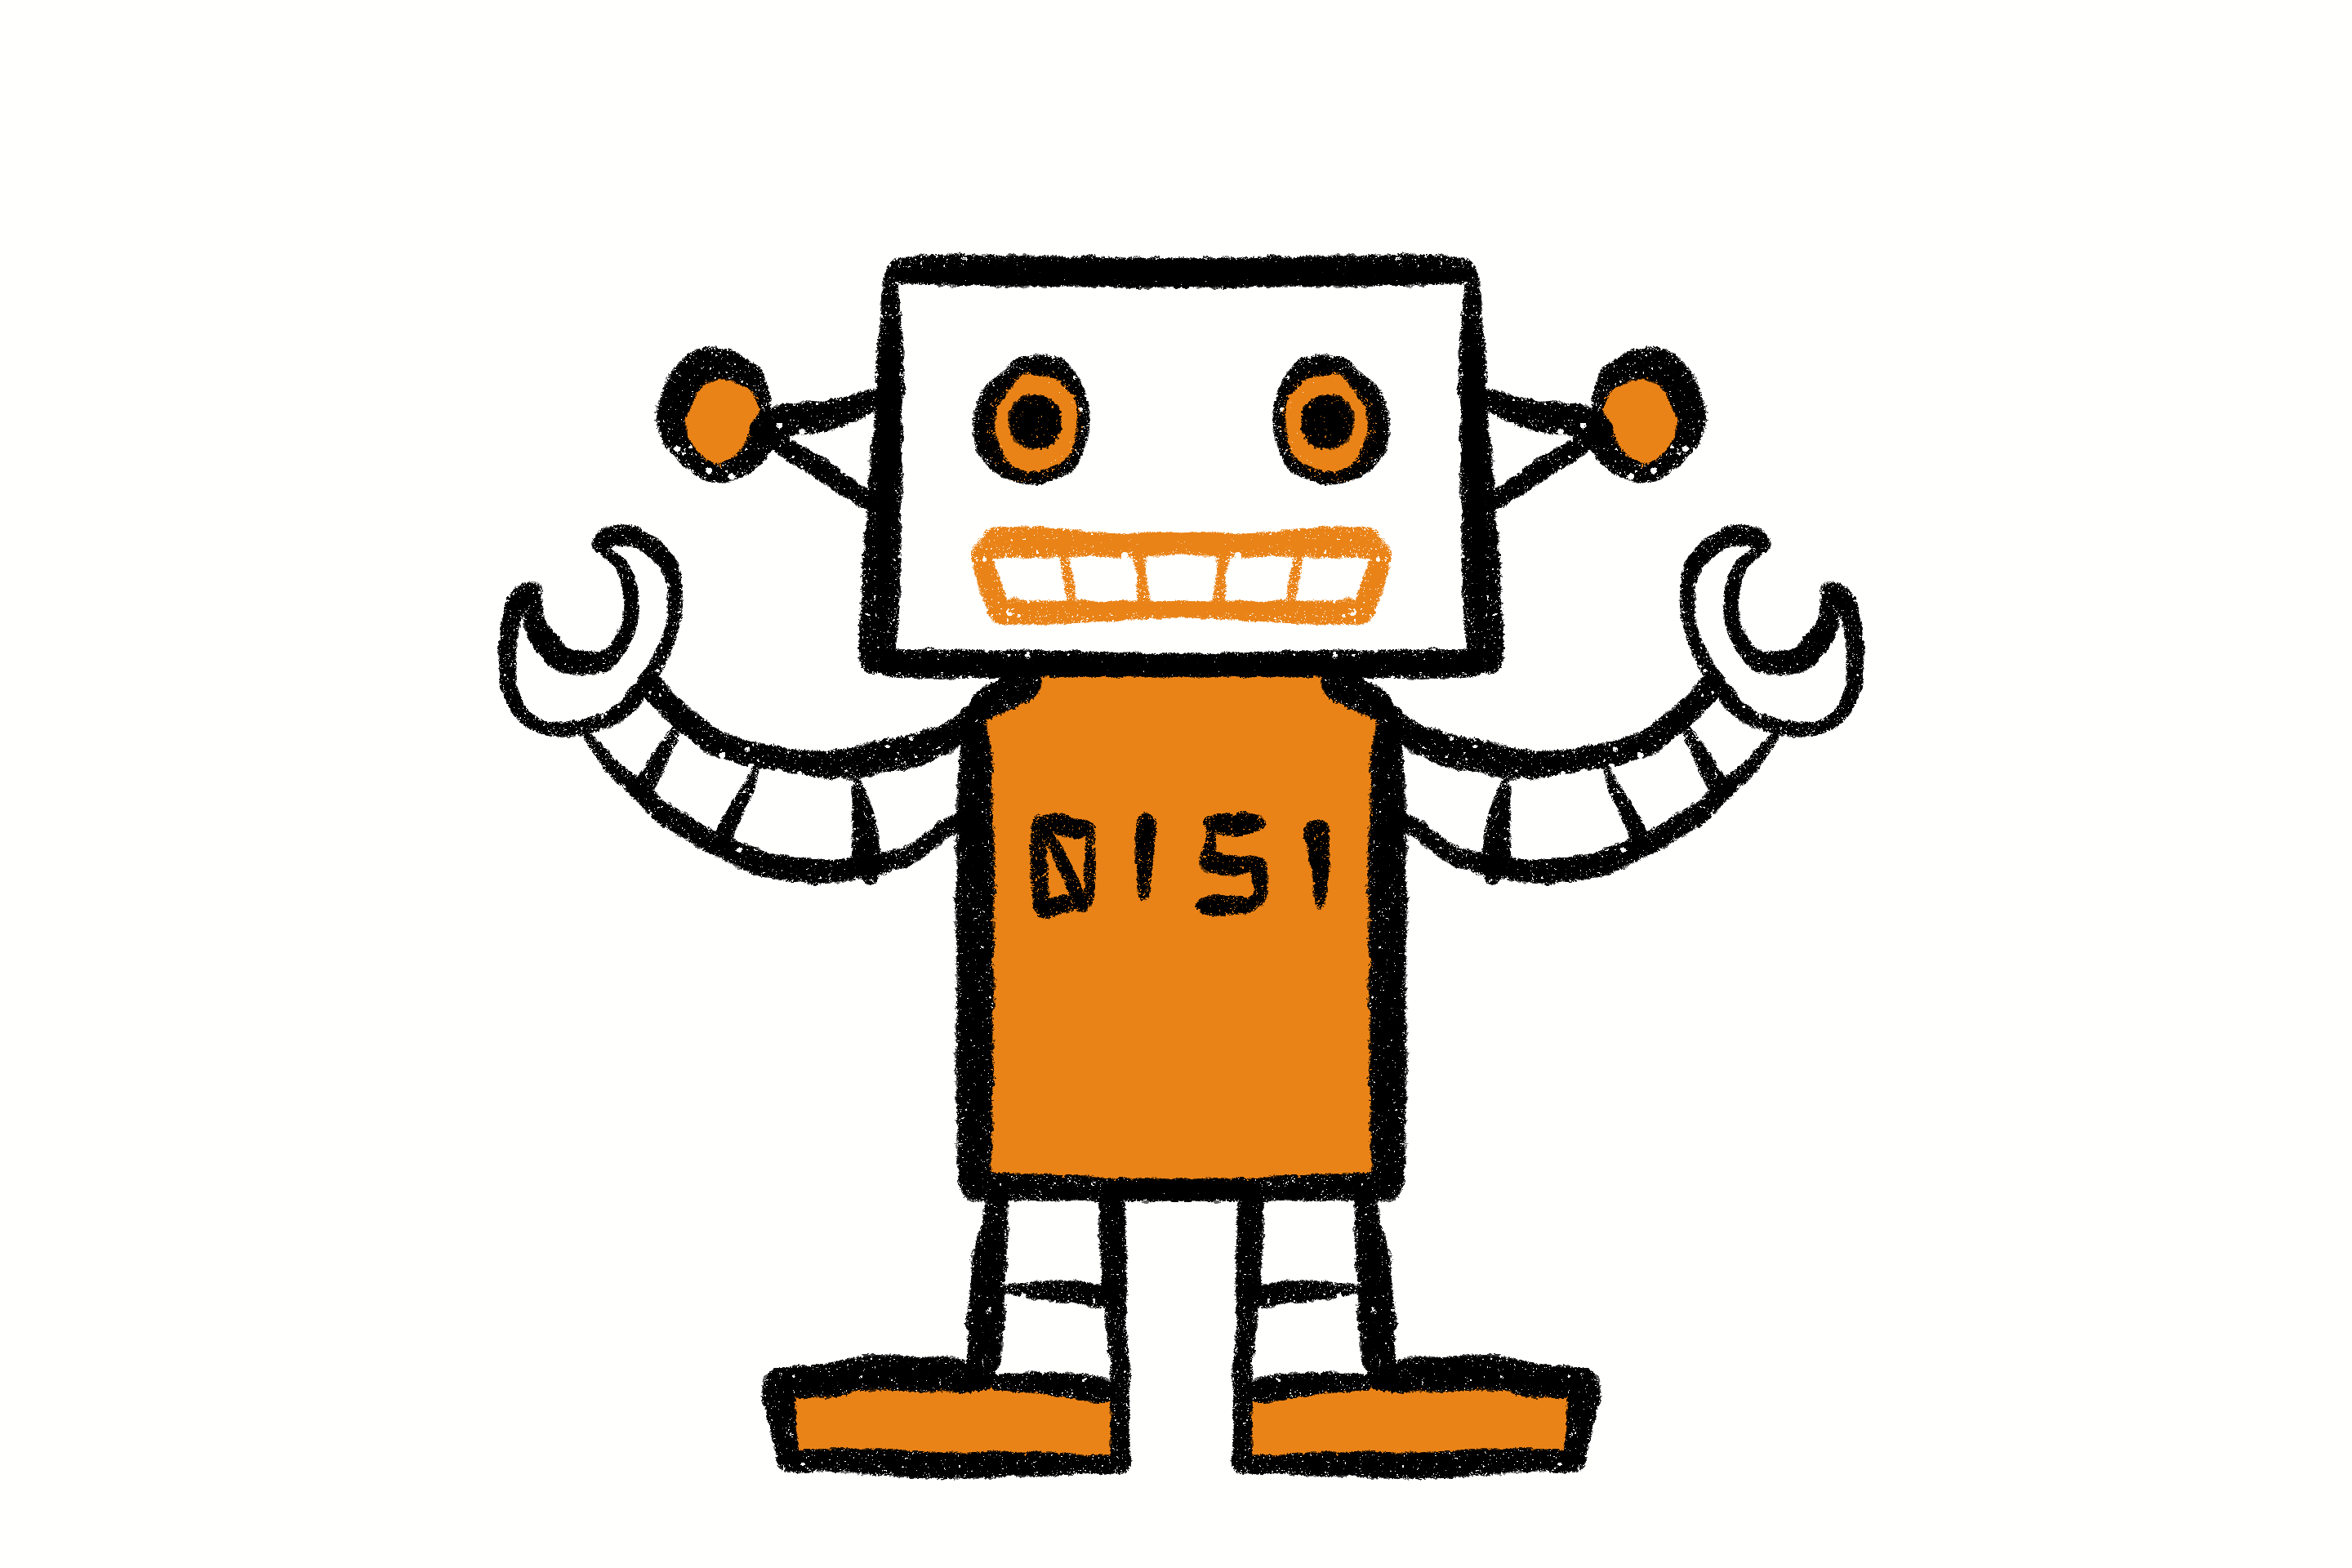 Robotic figure with rods for ears, claw hands, rectangle feet, and the numbers 0151 on its torso.